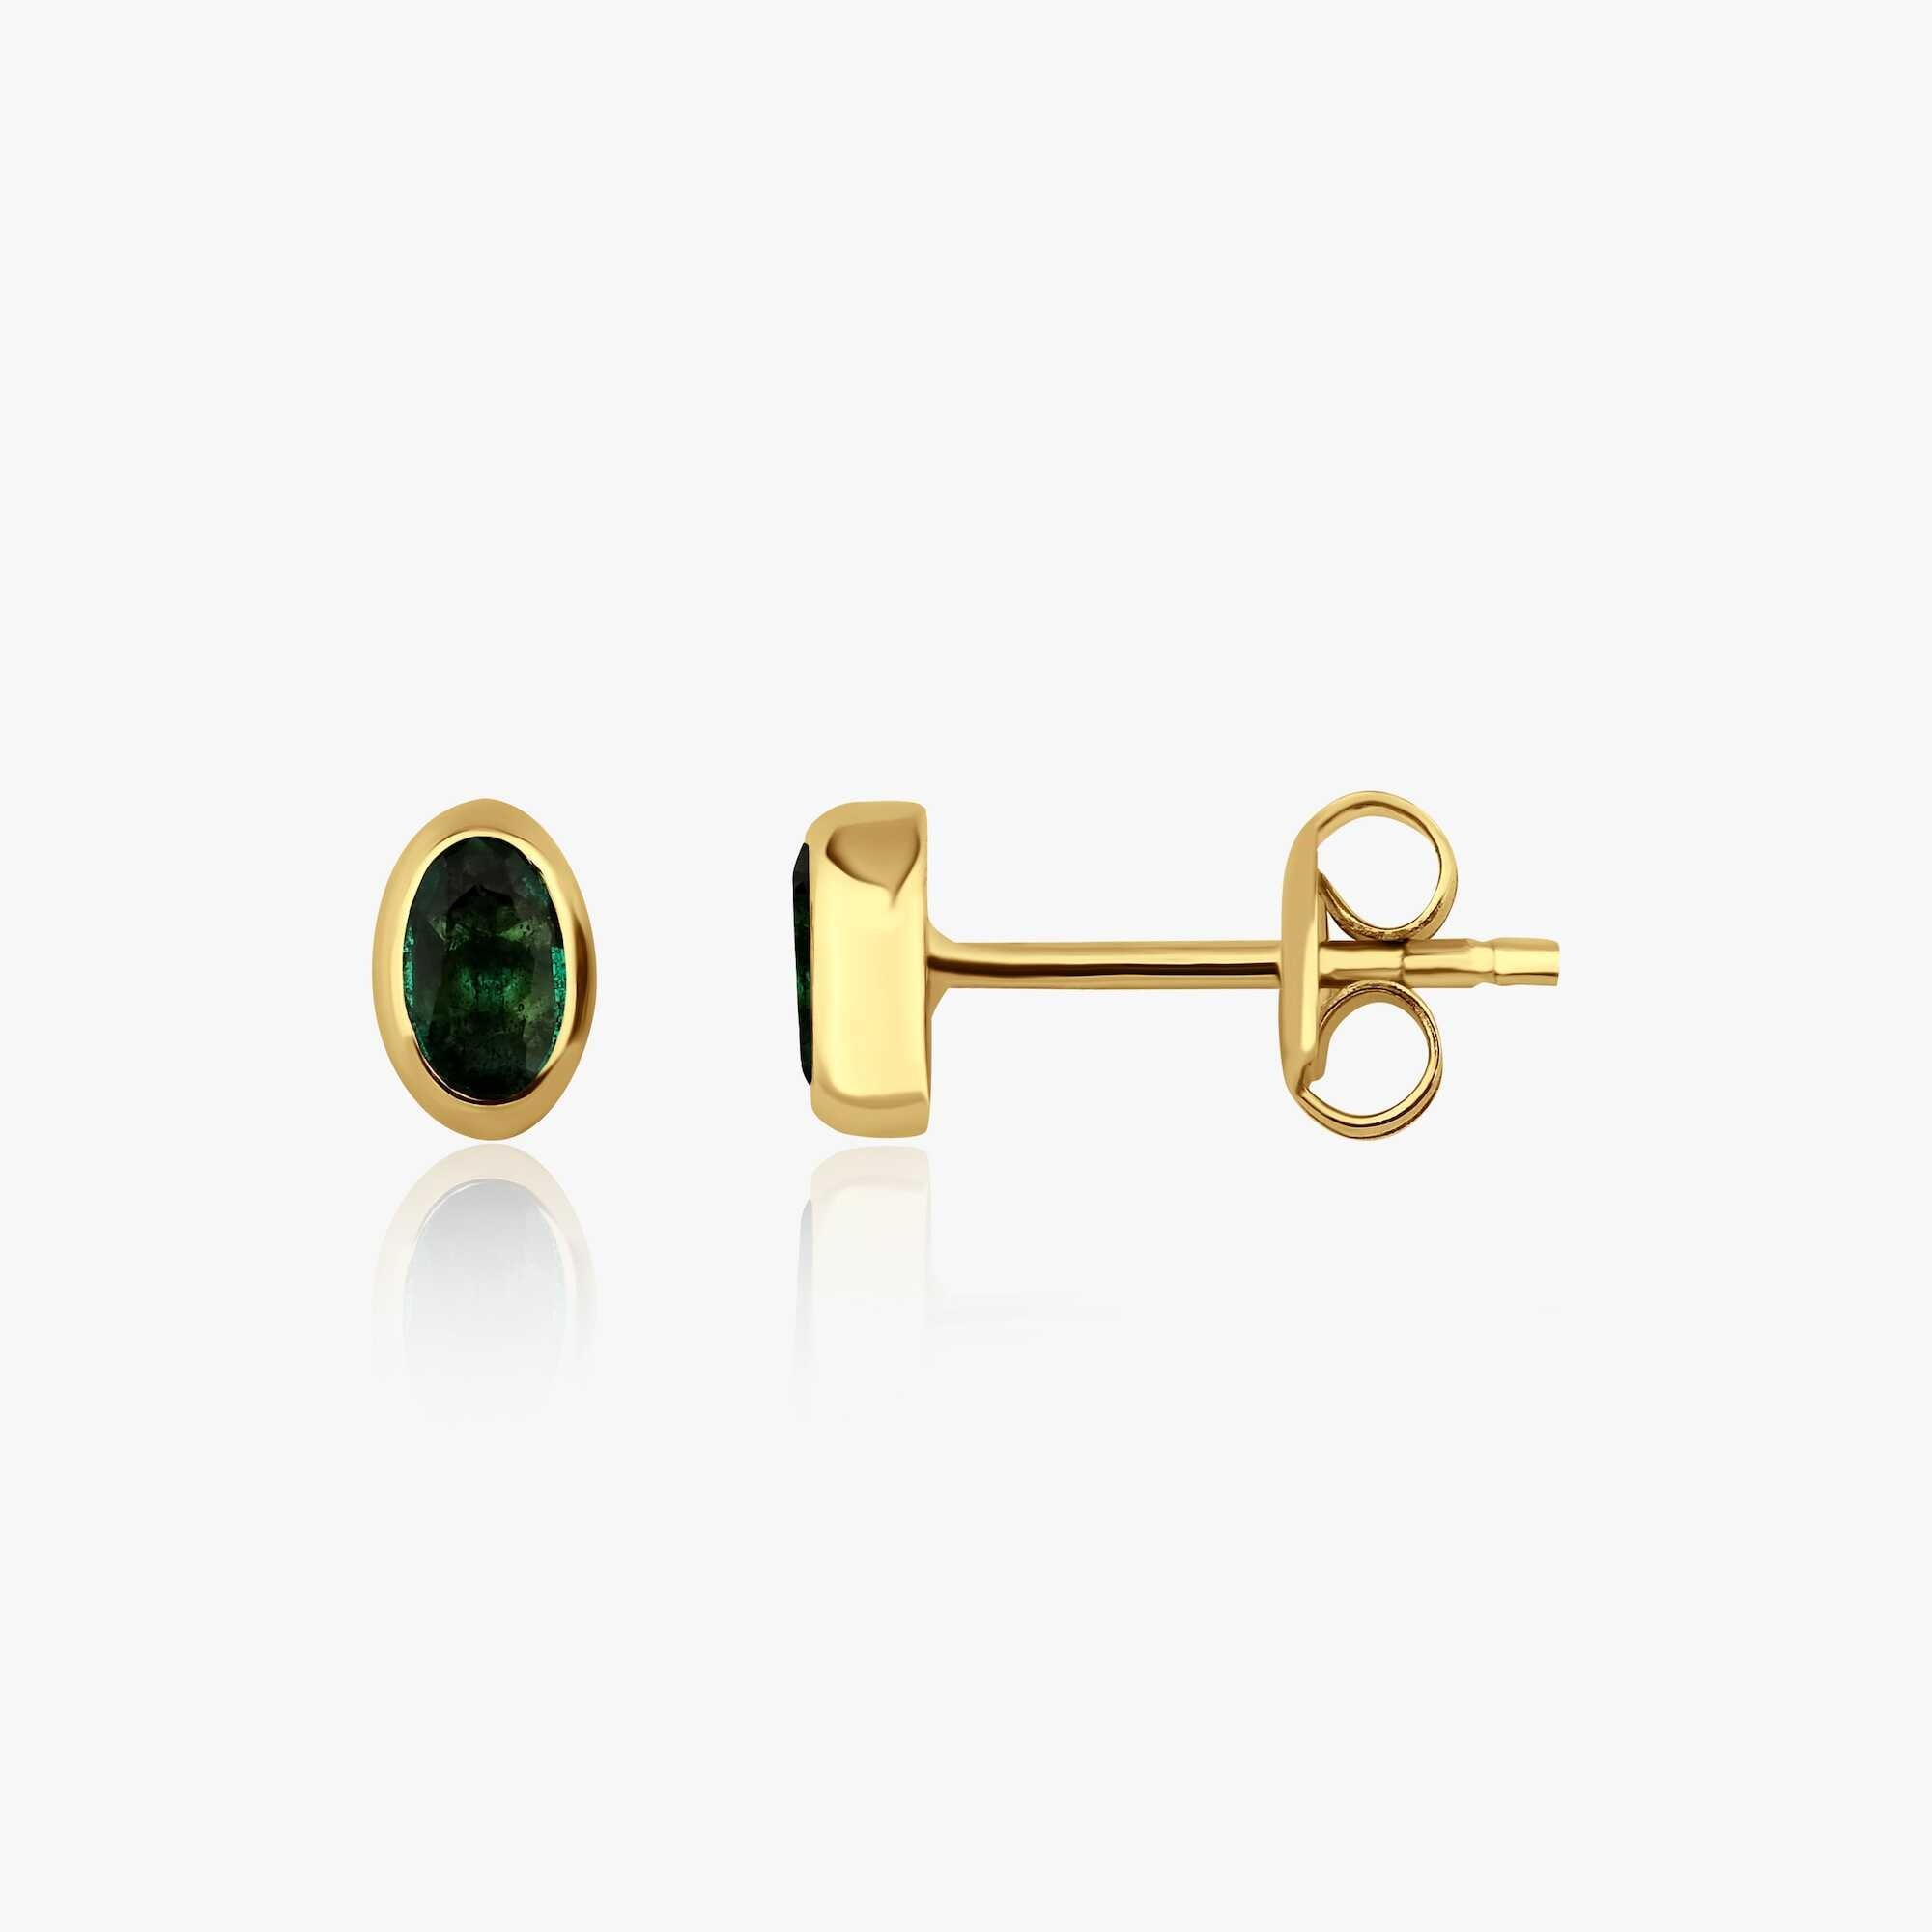 Oval Cut Emerald Stud Earrings Available in 14K and 18K Gold